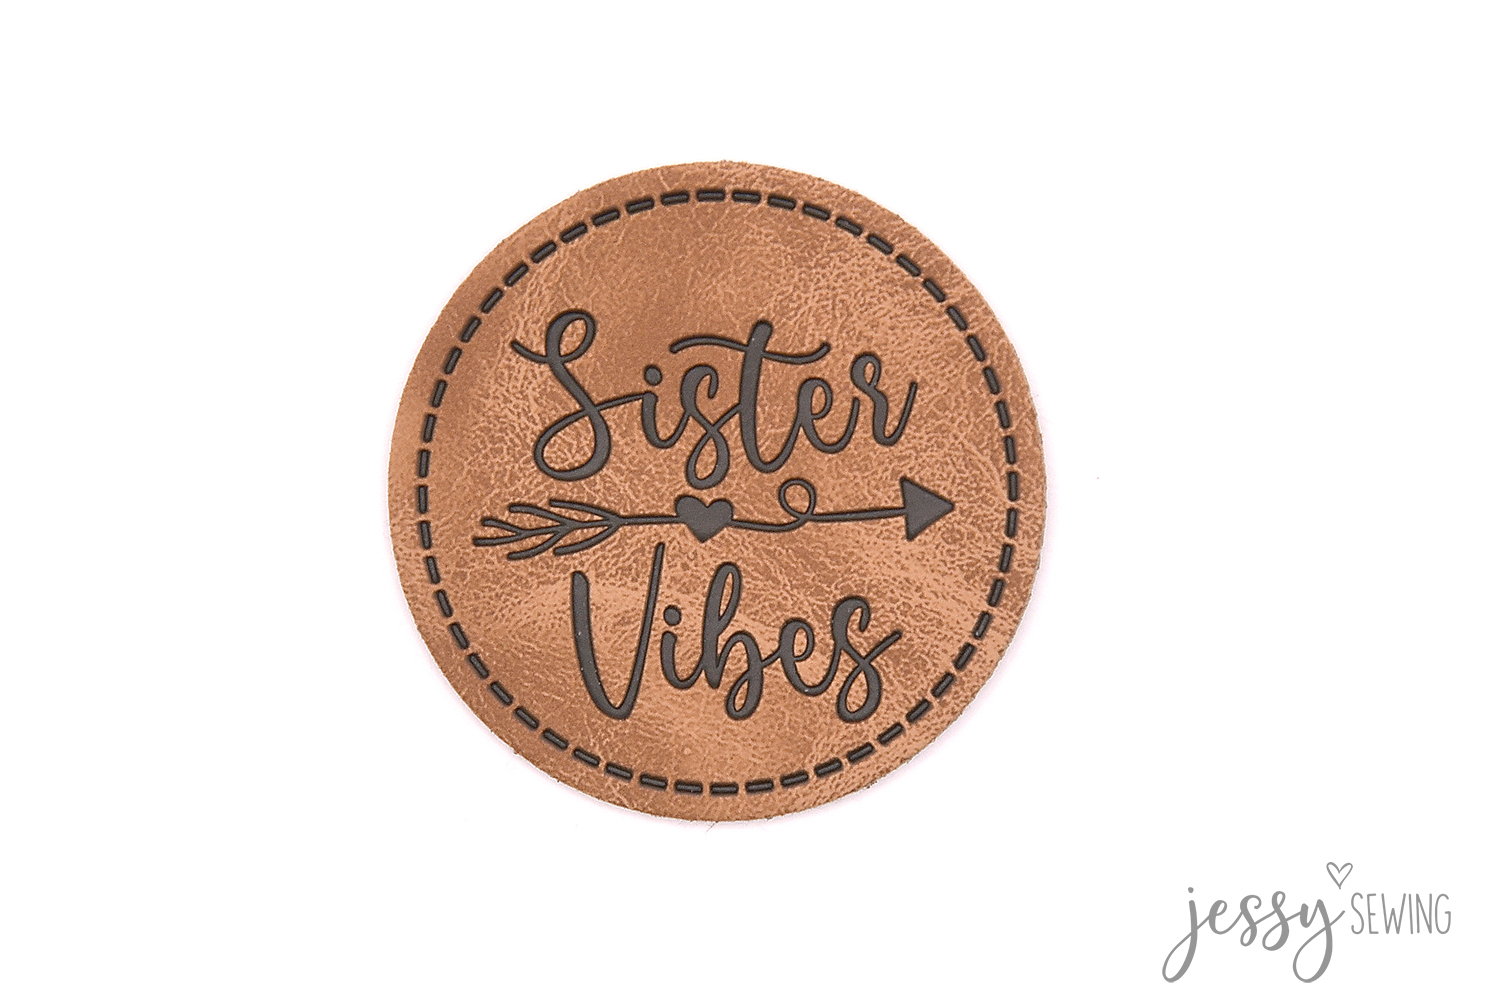 #113 Label "Sister Vibes"